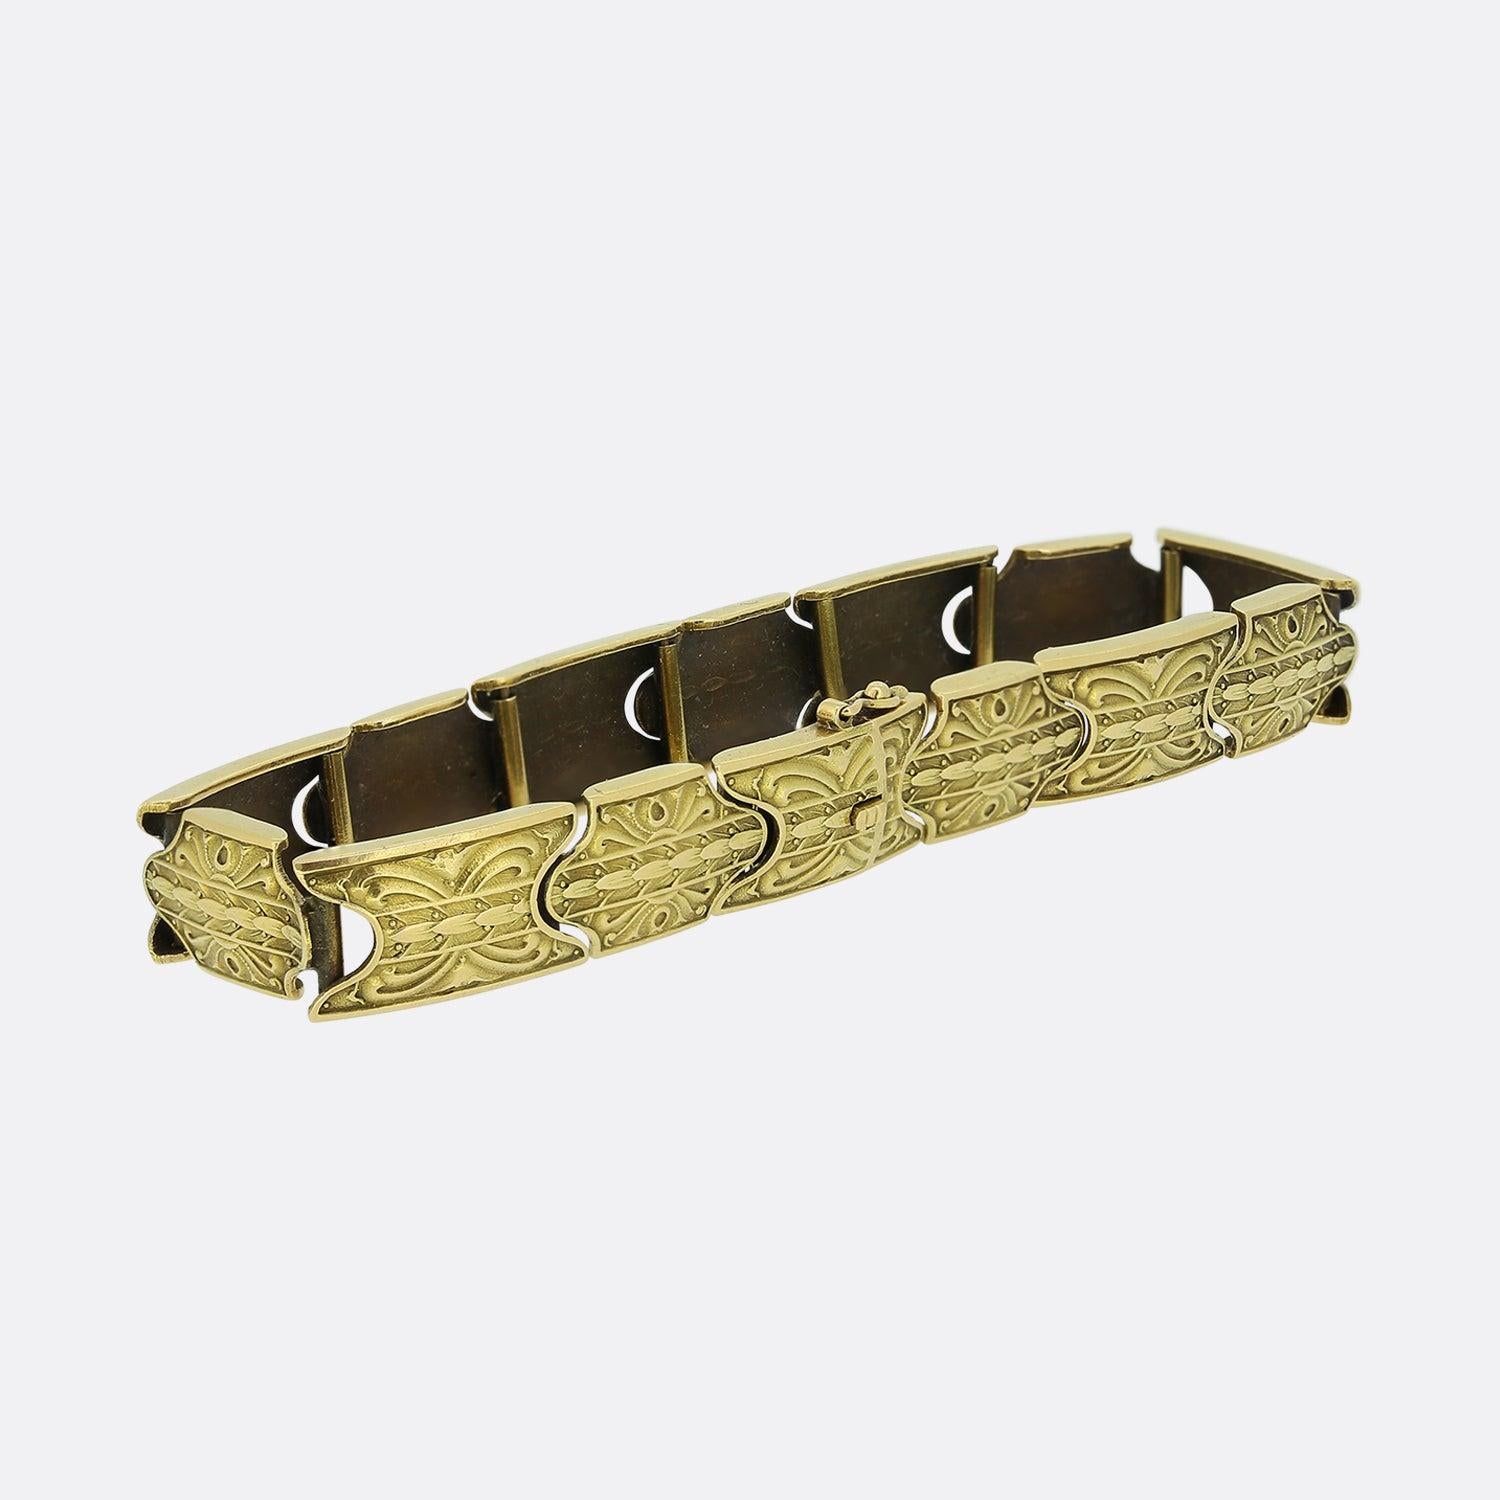 This is a beautiful and rare bracelet from the Victorian era. The bracelet features beautifully patterned links which have been carved in an elegant style. It sits in a perfectly fitted vintage Asprey box.

Condition: Used (Good)
Weight: 21.1